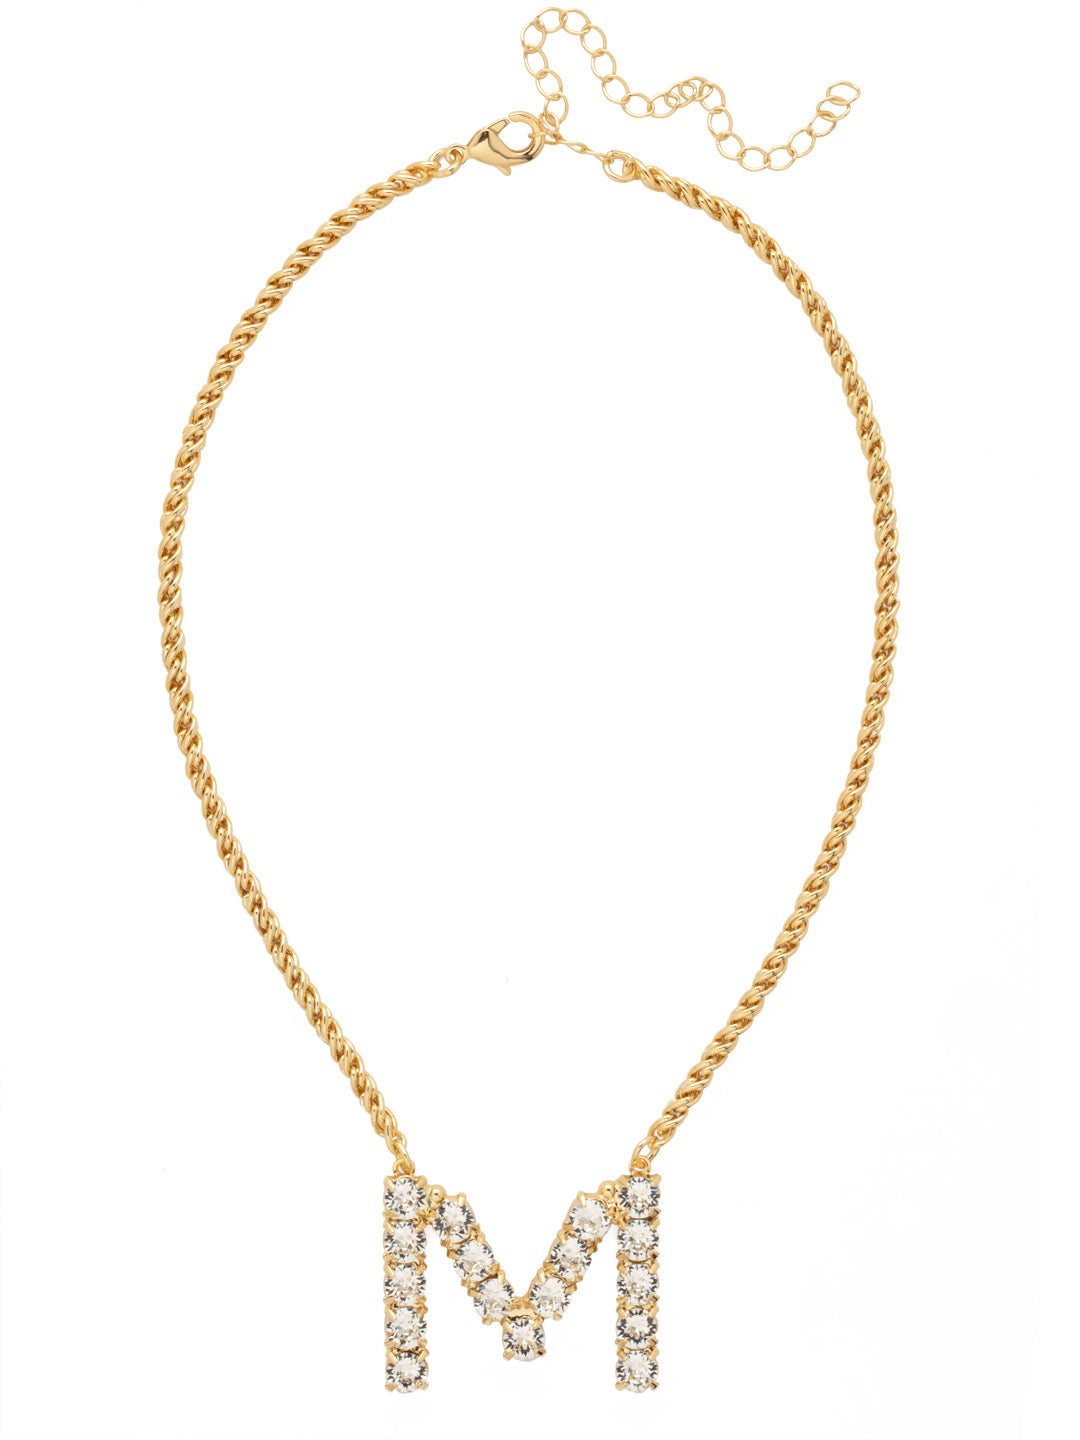 M Initial Rope Pendant Necklace - NFK32BGCRY - <p>The Initial Rope Pendant Necklace features a crystal encrusted metal monogram pendant on an adjustable rope chain, secured with a lobster claw clasp. From Sorrelli's Crystal collection in our Bright Gold-tone finish.</p>